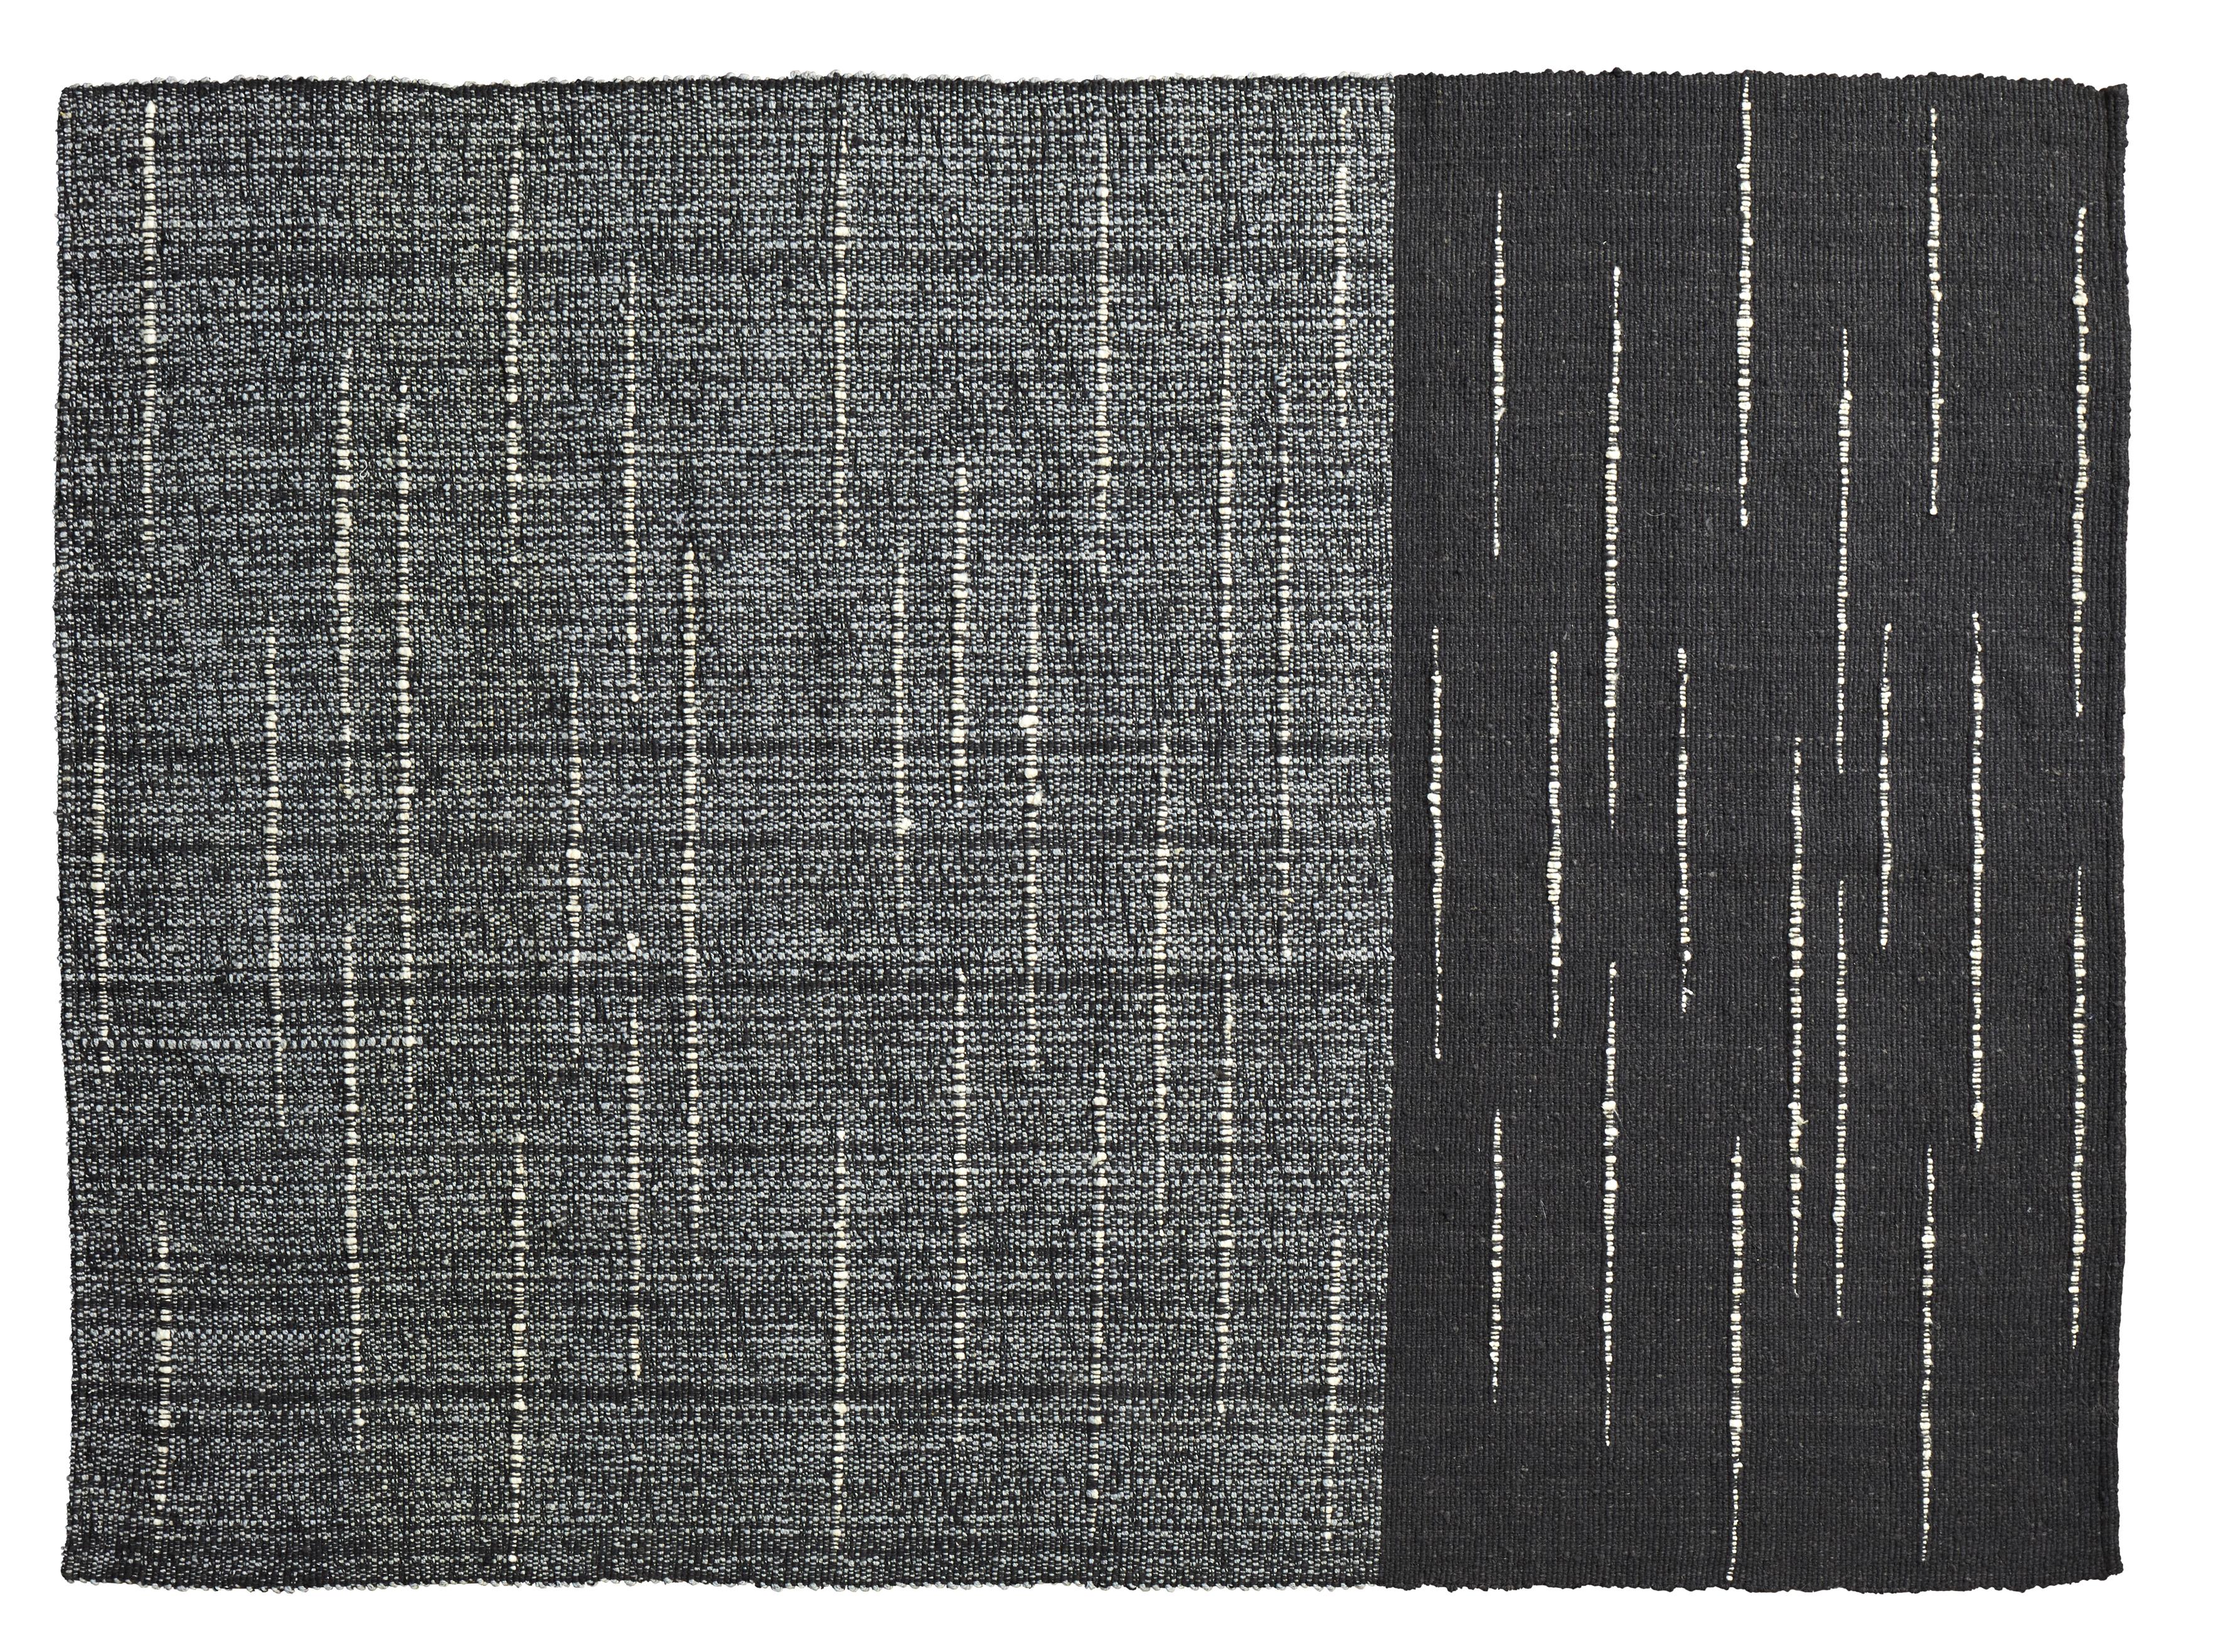 Small Oruga Subas rug by Sebastian Herkner
Materials: 100% natural virgin wool. 
Technique: Naturally dyed fibers. Hand-woven in Colombia.
Dimensions: W 160 x L 220 cm 
Available in colors: karo, linea 1, linea 2, moton, oruga. 

The Subas